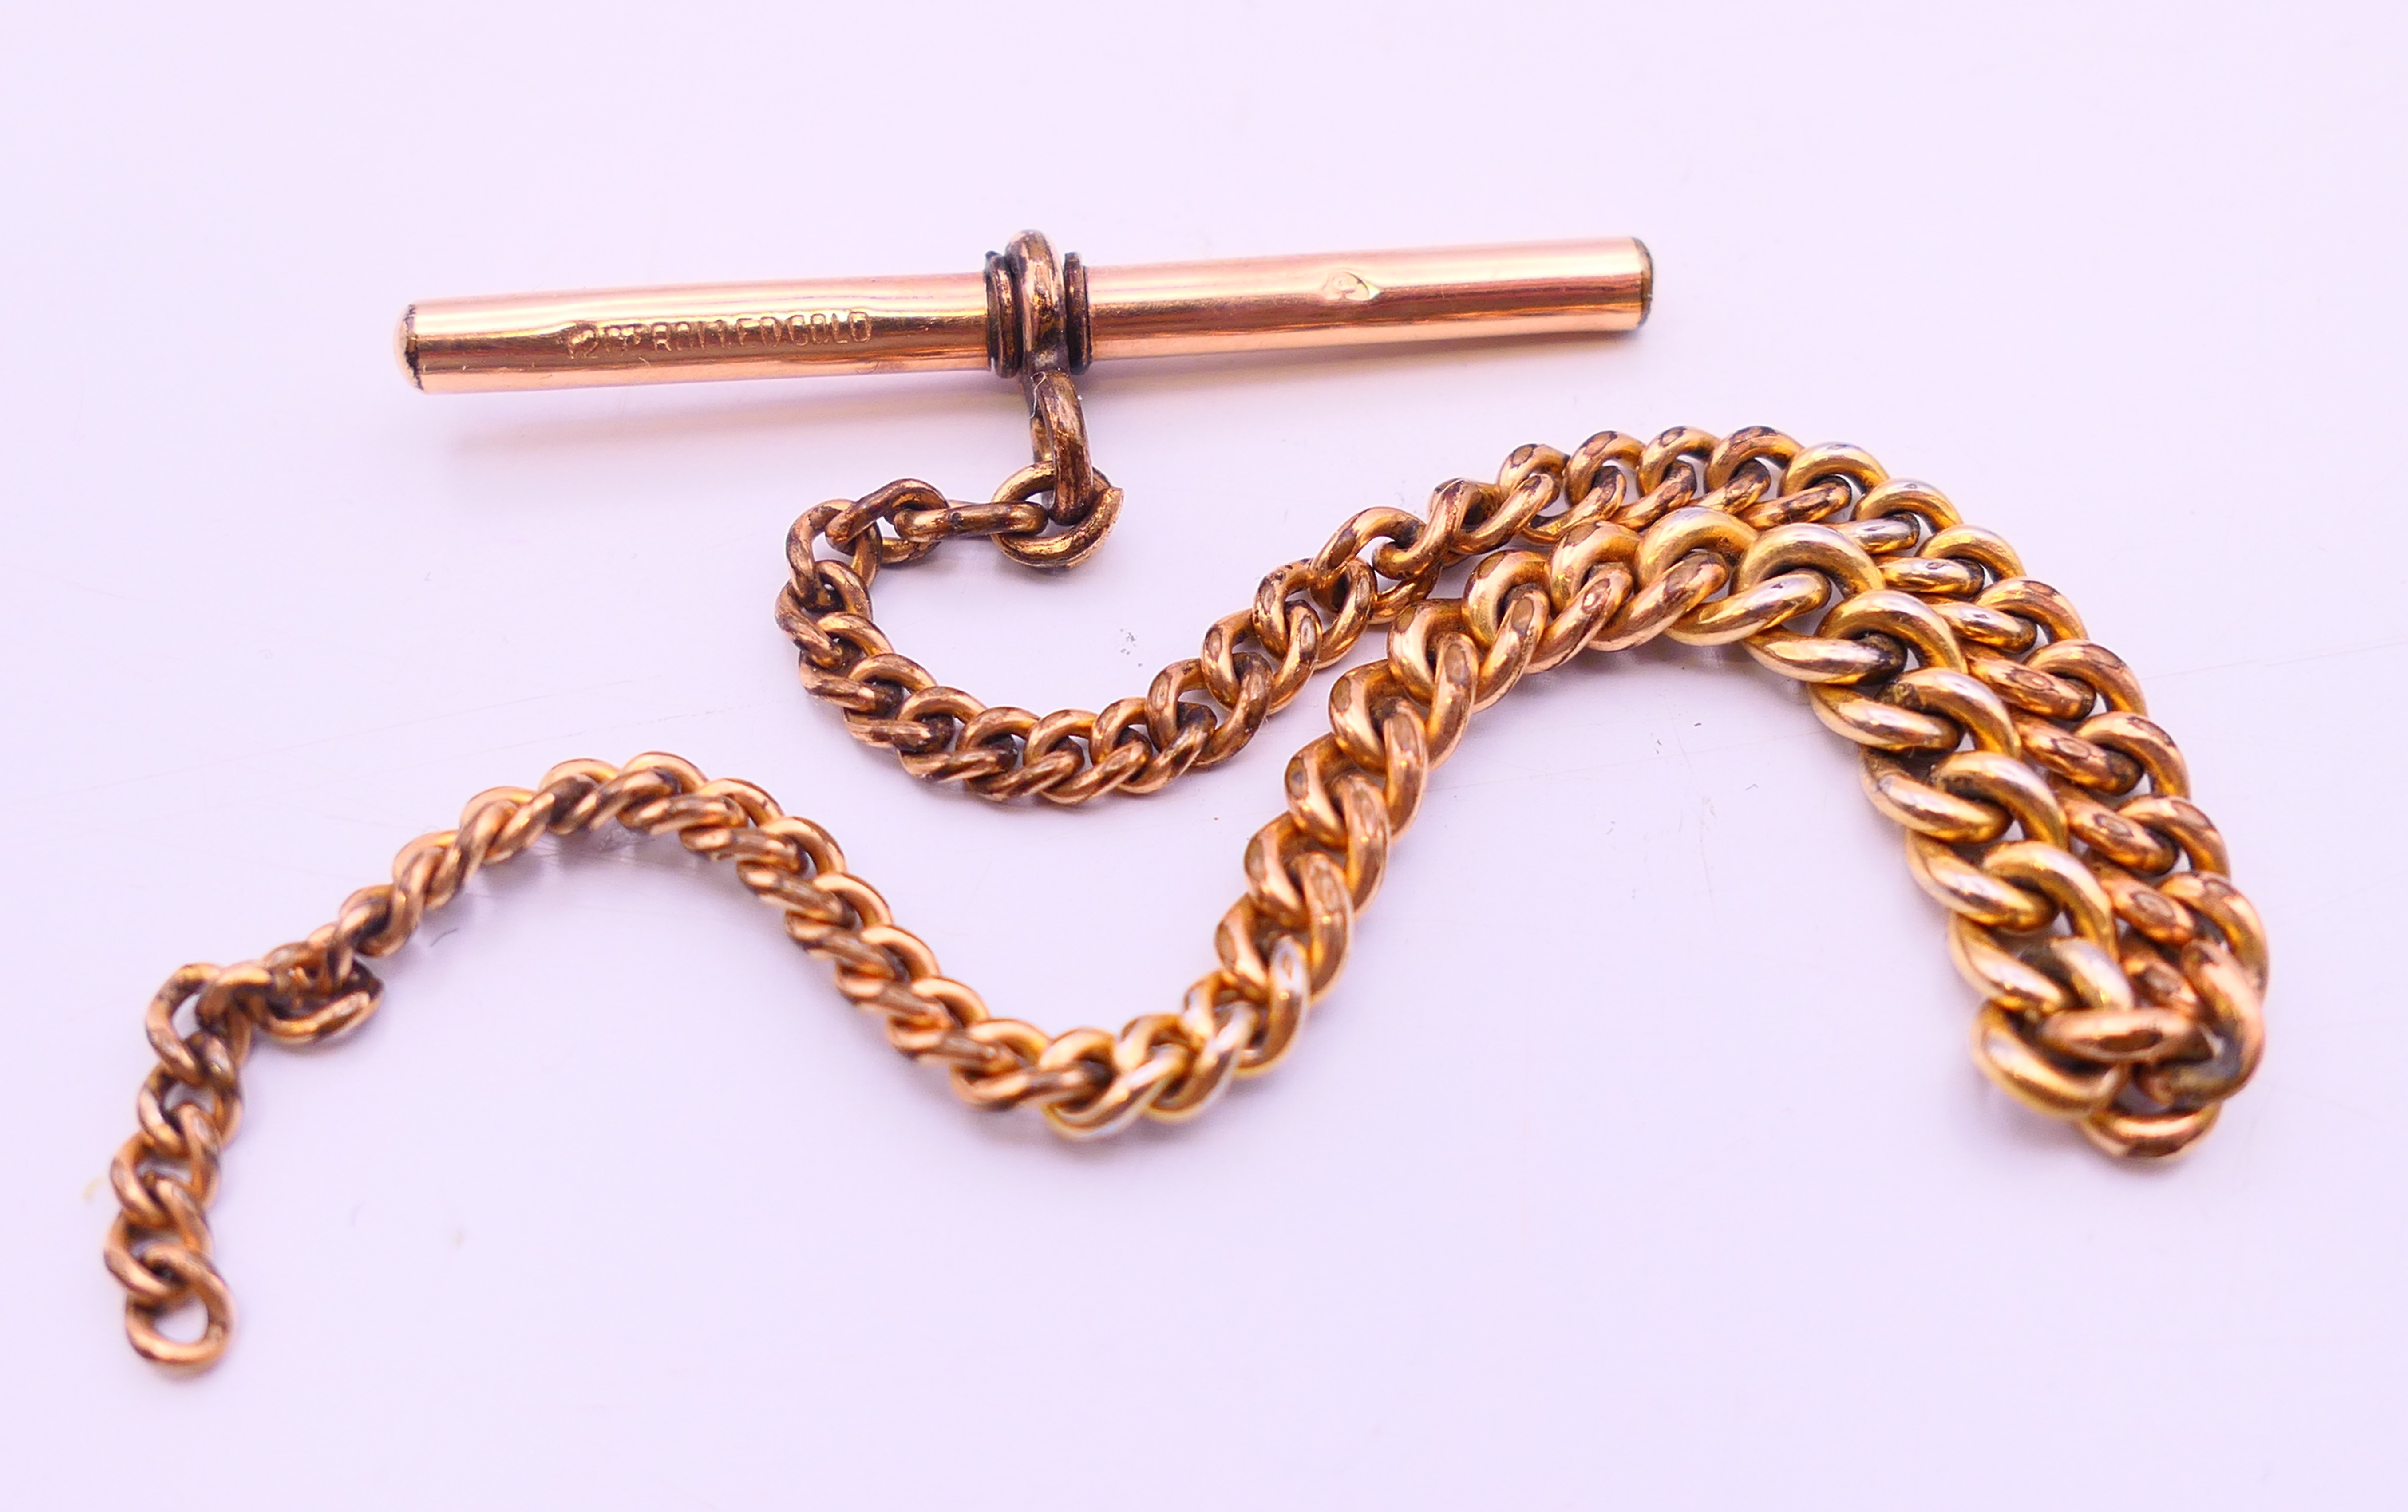 Three silver rings, a tie clip (1/20 9 ct gold) and part of a watch chain. Tie clip 6 cm long. - Image 6 of 7